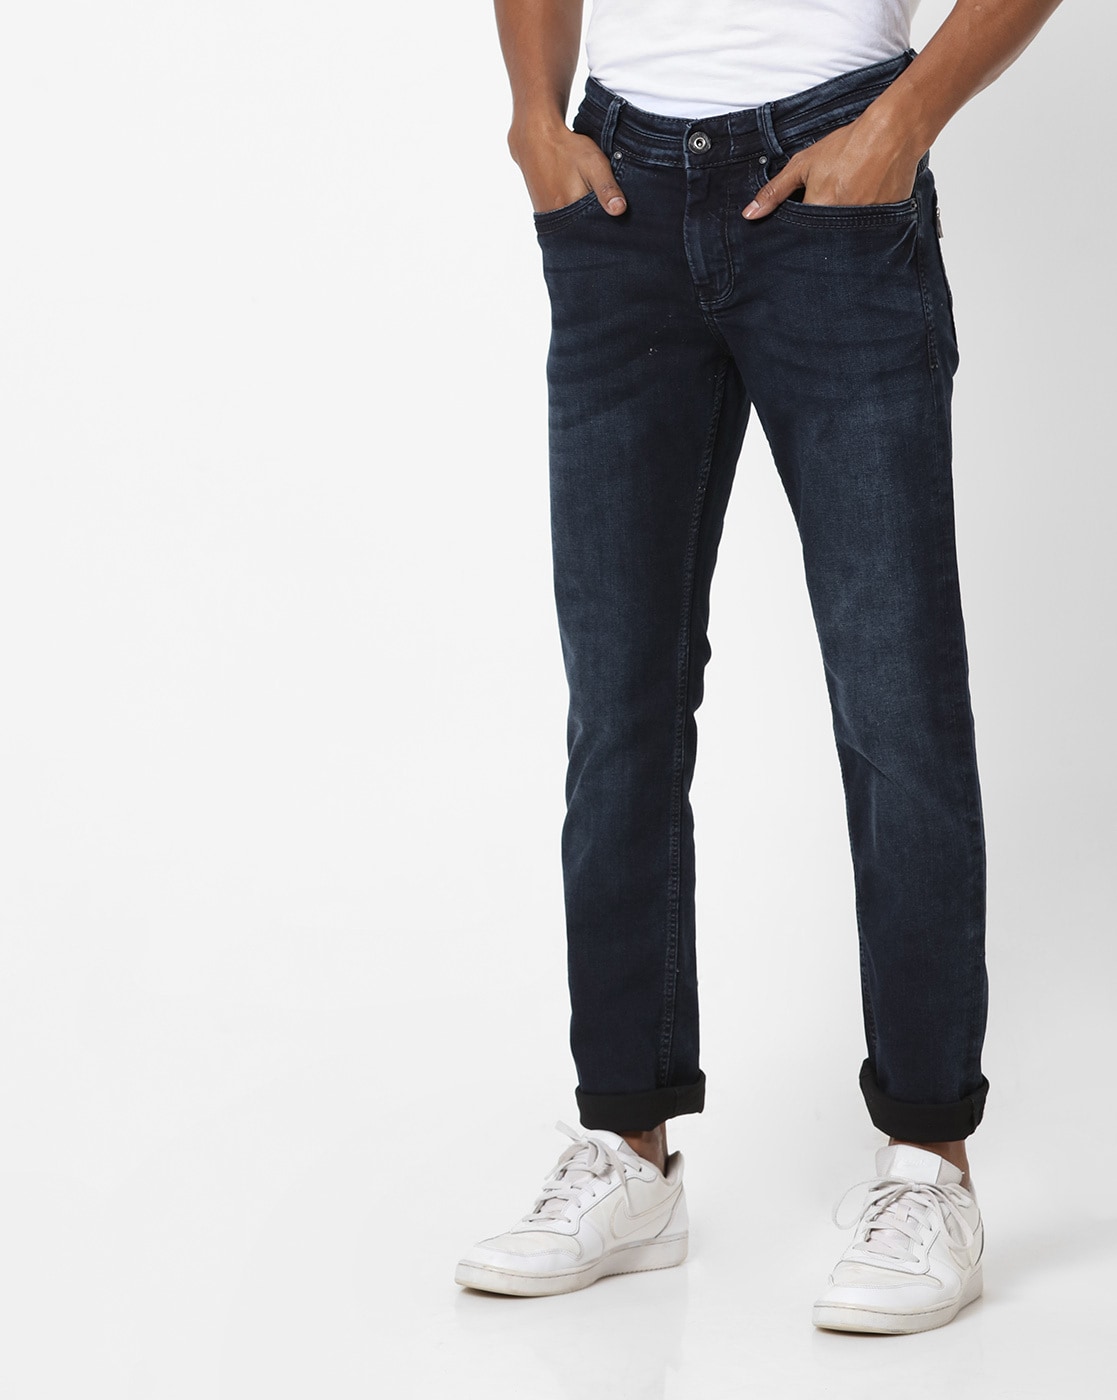 mufti jeans online